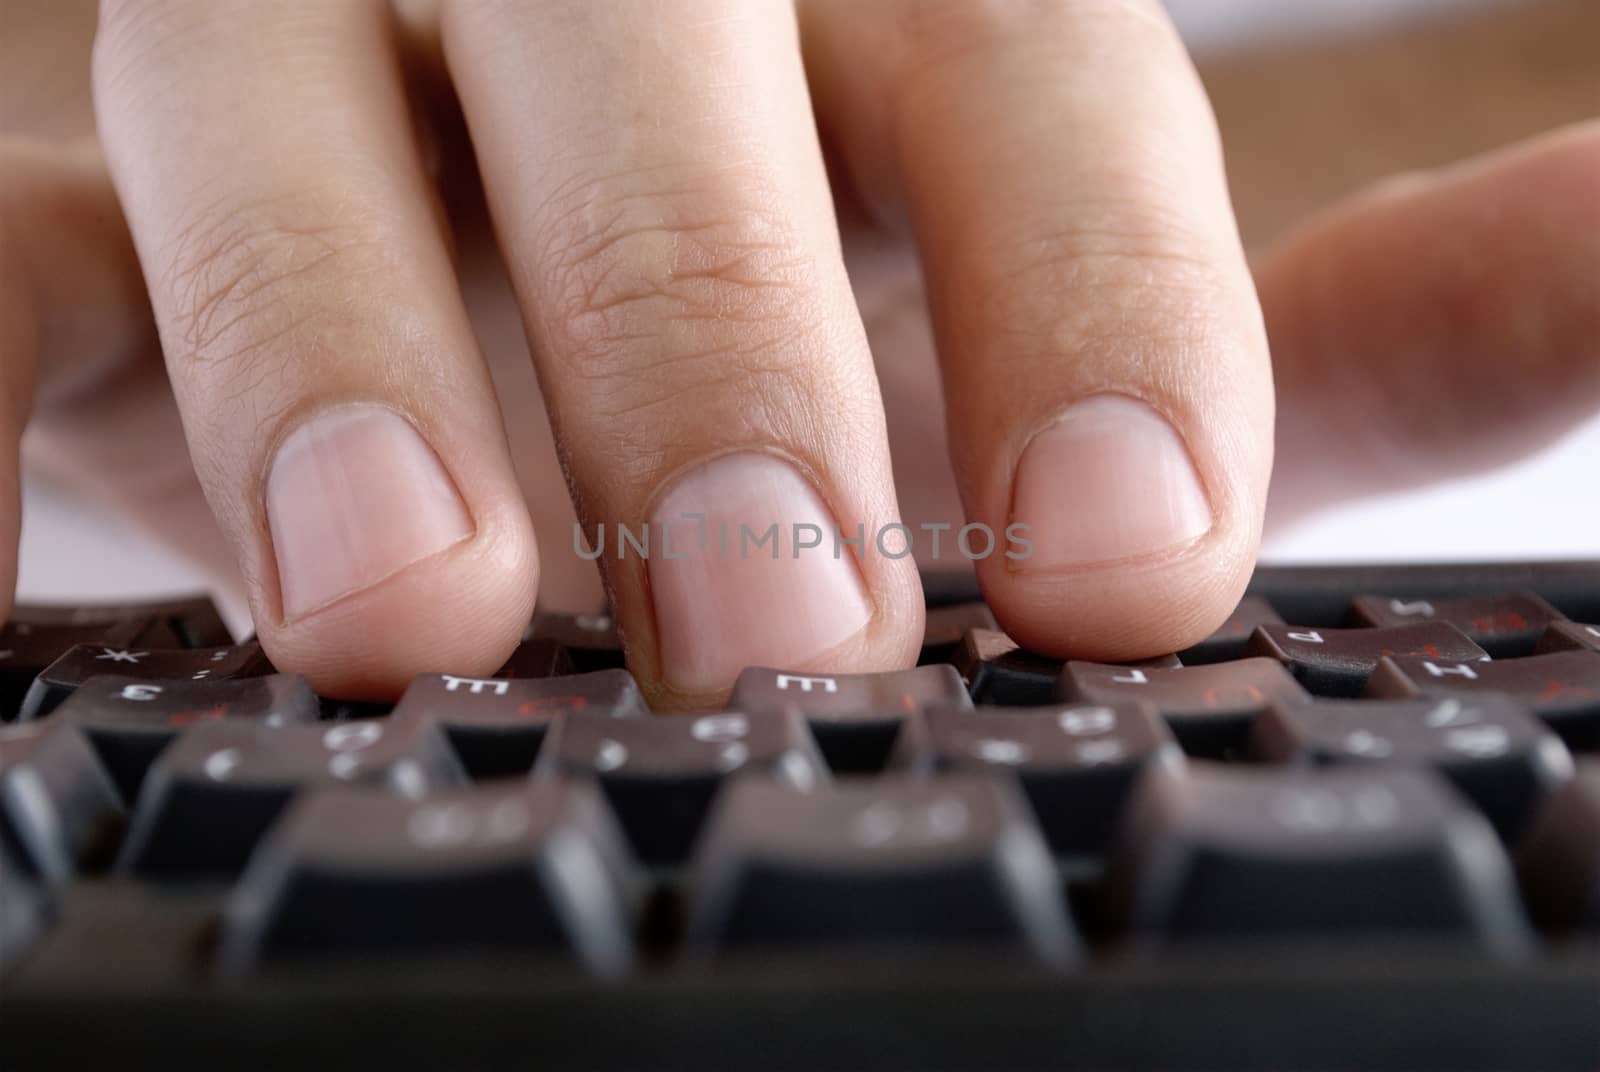 man's hand on computer keyboard woman's hand on the keyboard typing